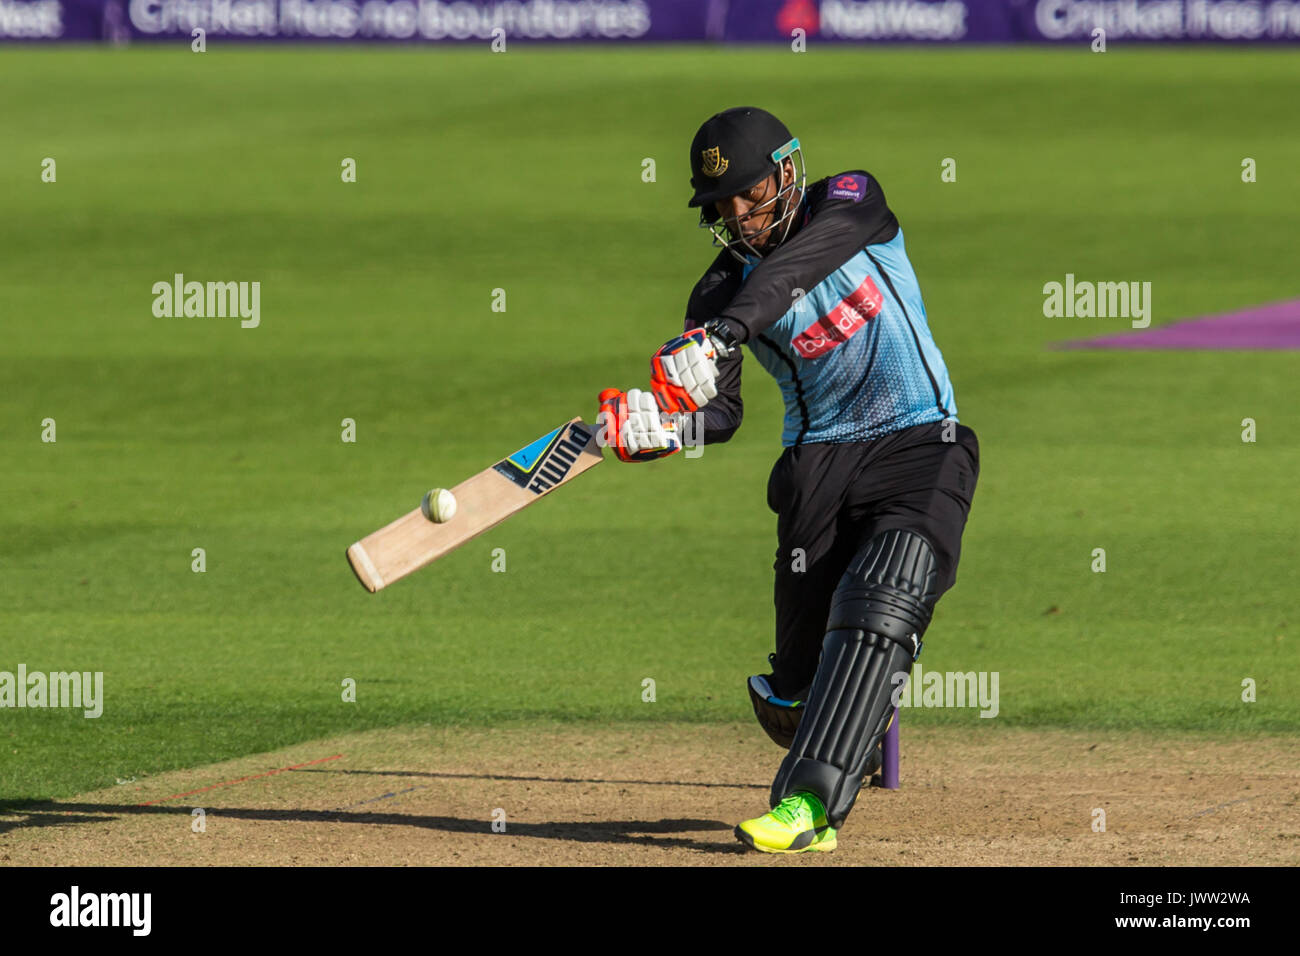 London, UK.13 August 2017. Chris Jordan smashes a six batting for Sussex  Sharks against Surrey in the NatWest T20 Blast match at the Kia Oval. David  Rowe/Alamy Live News Stock Photo -